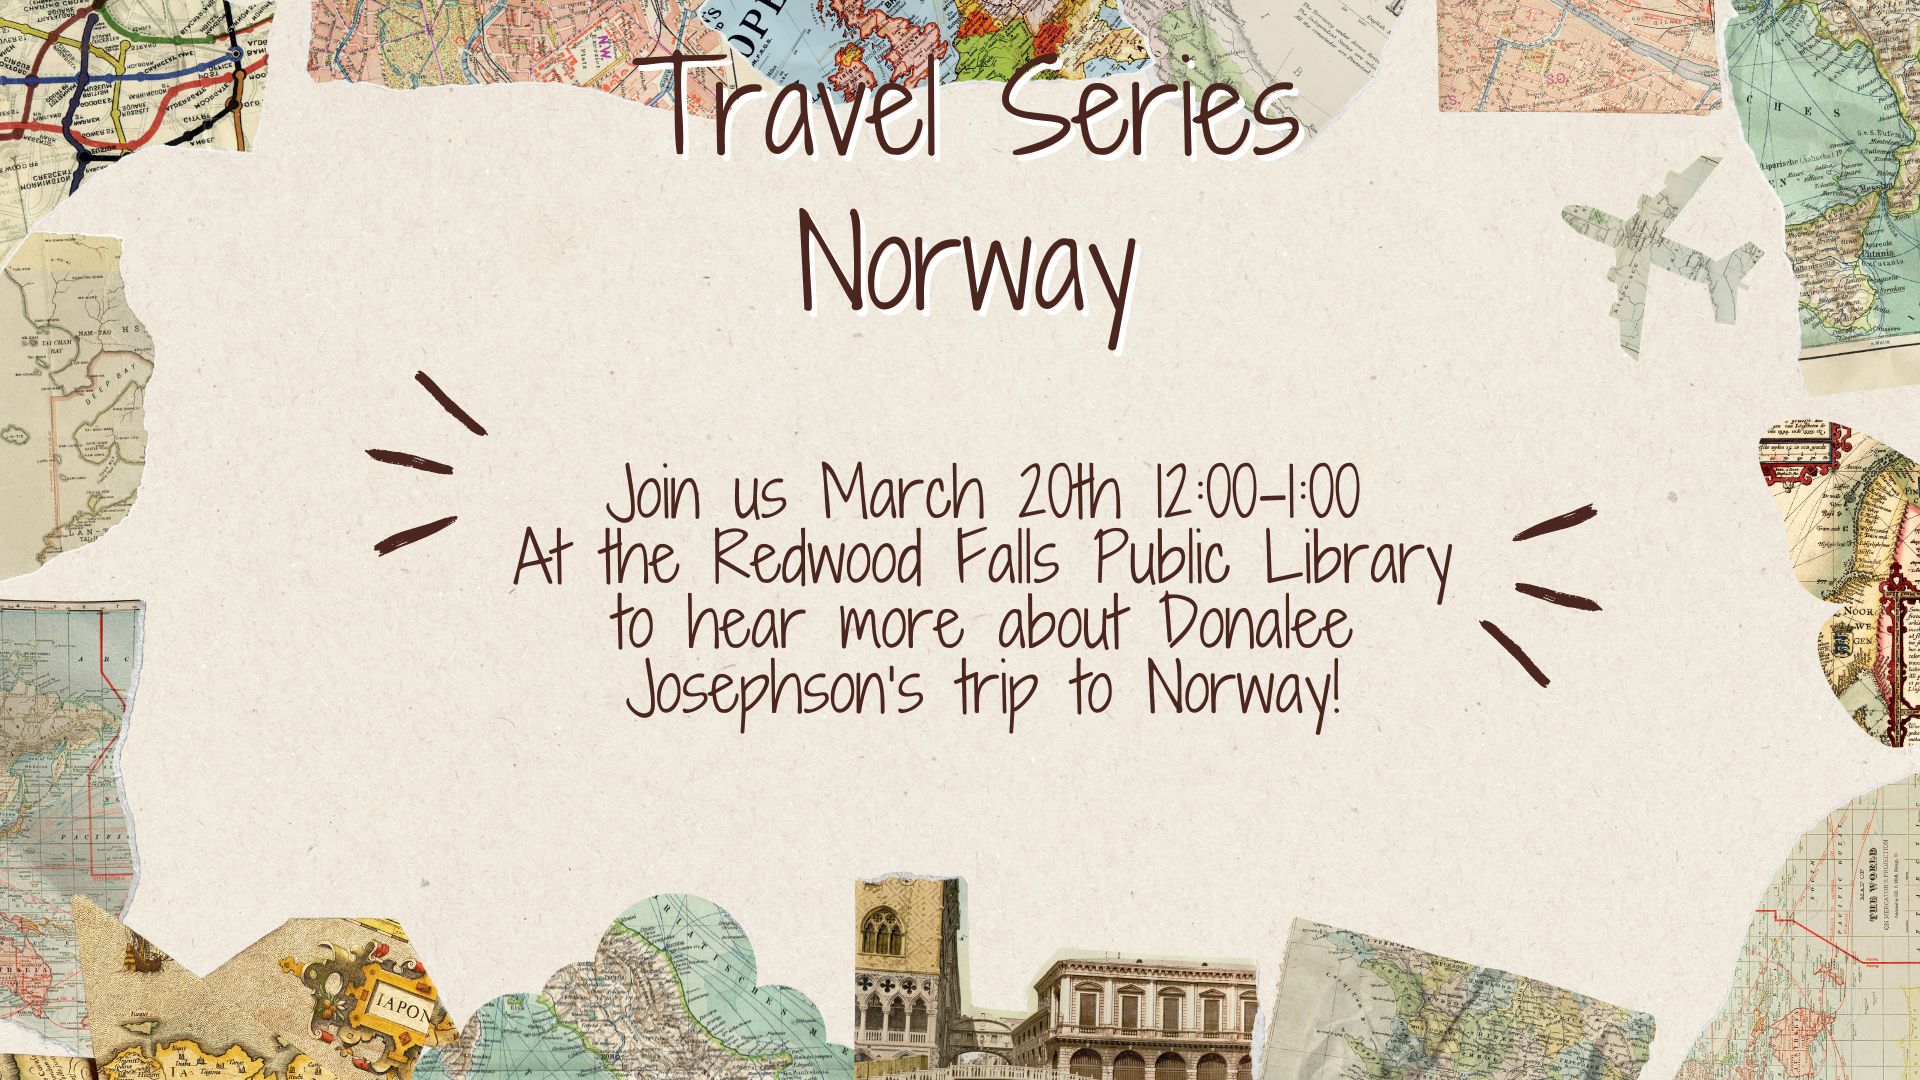 <h1 class="tribe-events-single-event-title">Travel Series – Norway</h1>